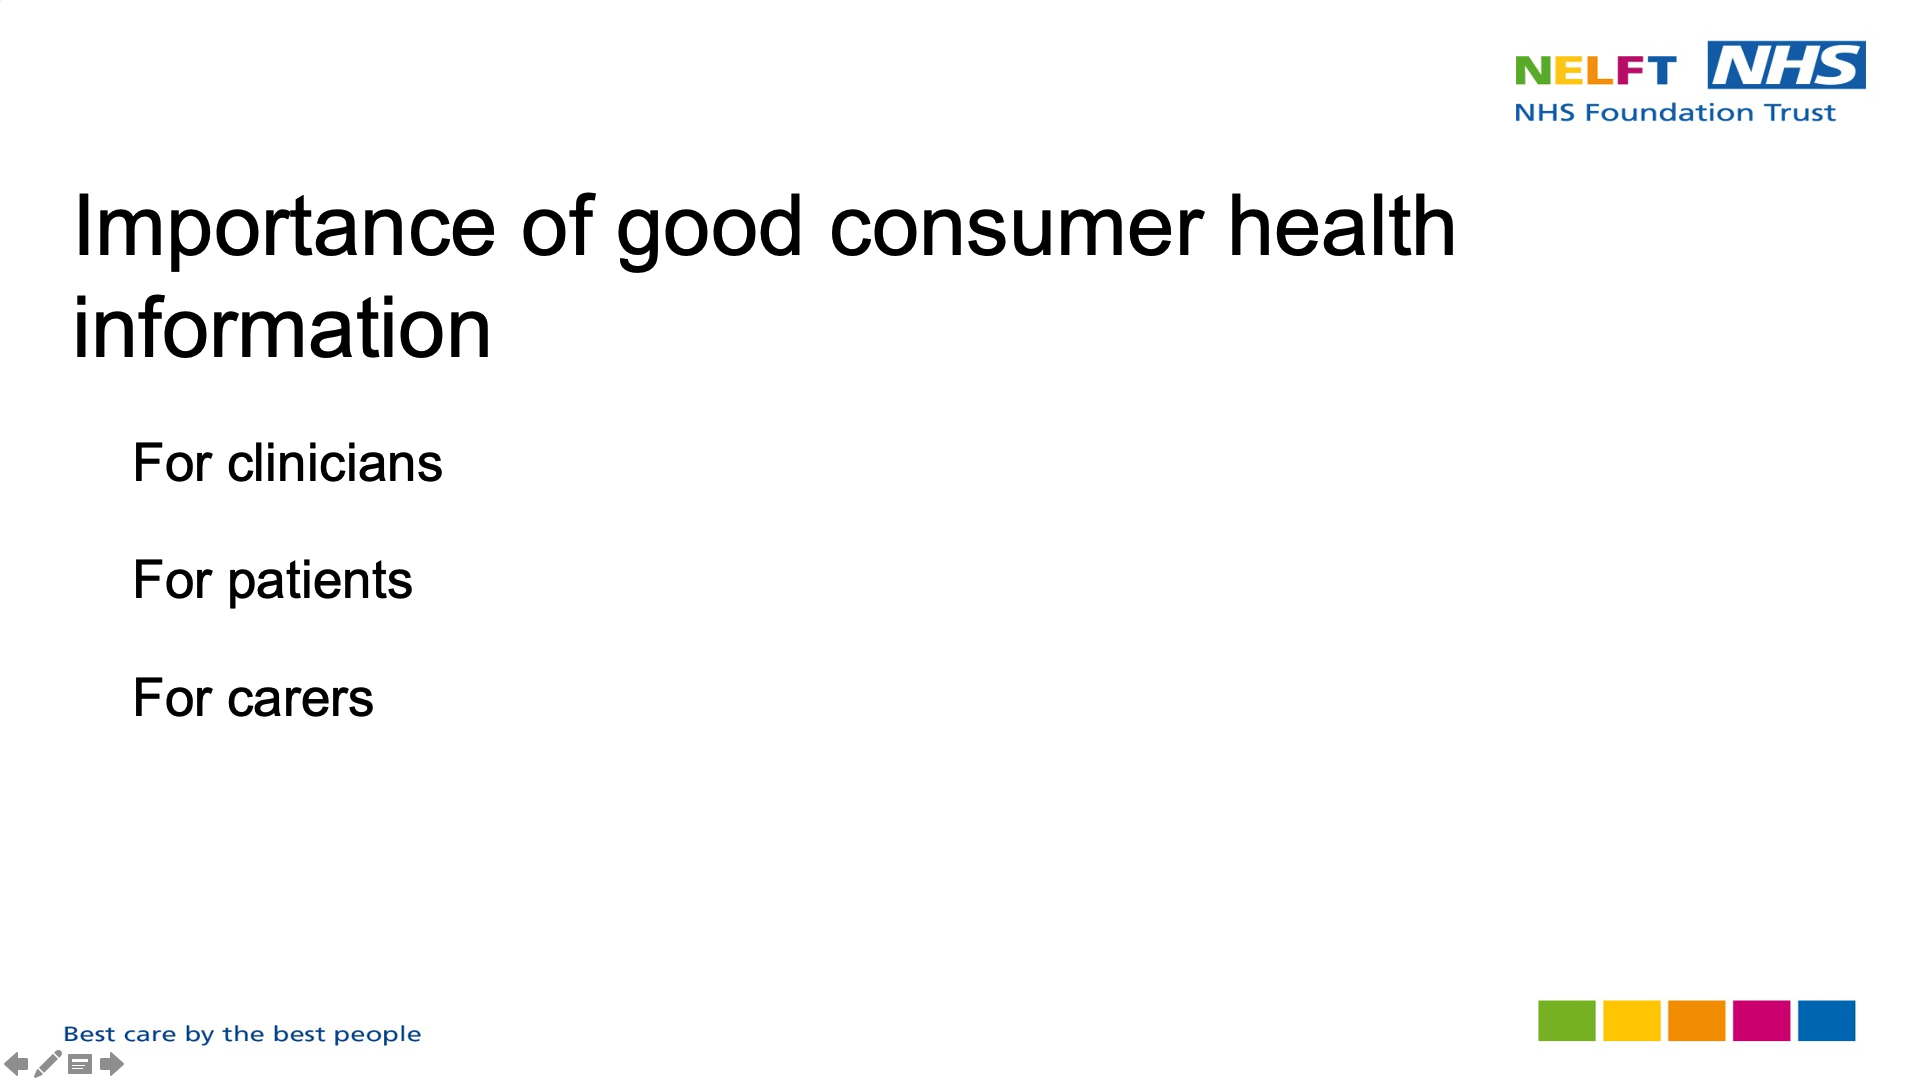 Title: Importance of good consumer health information. Text on page: For clinicians, for patients, for carers